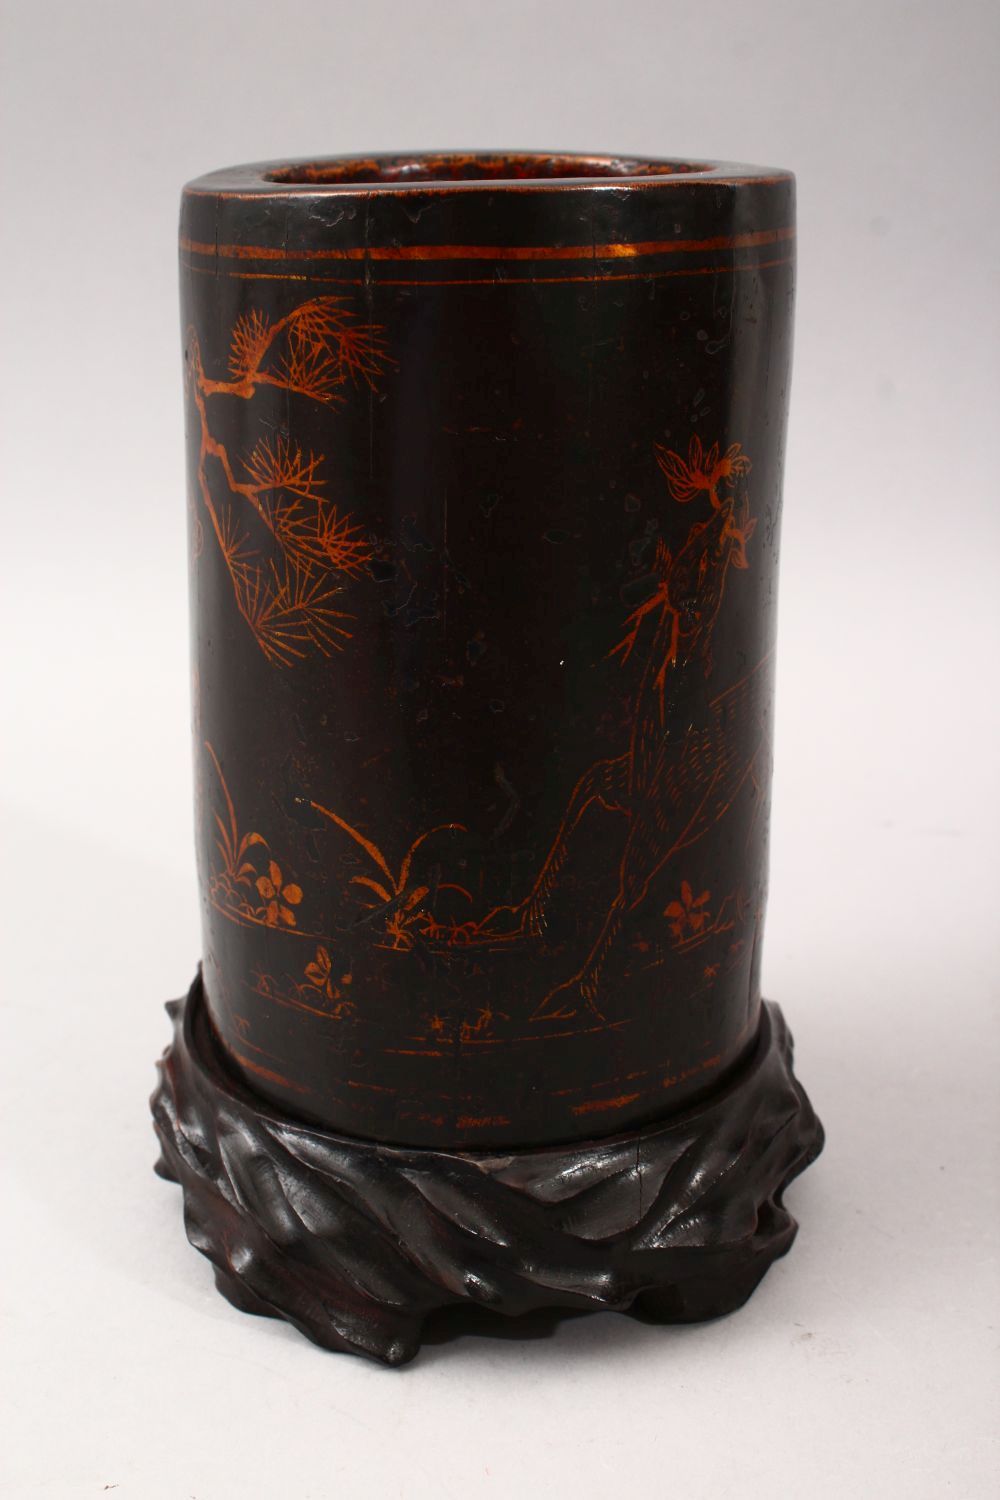 A GOOD 19TH CENTURY CHINESE LACQUER BRUSH POT & STAND, The pot decorated with gold lacquer to depict - Image 4 of 6